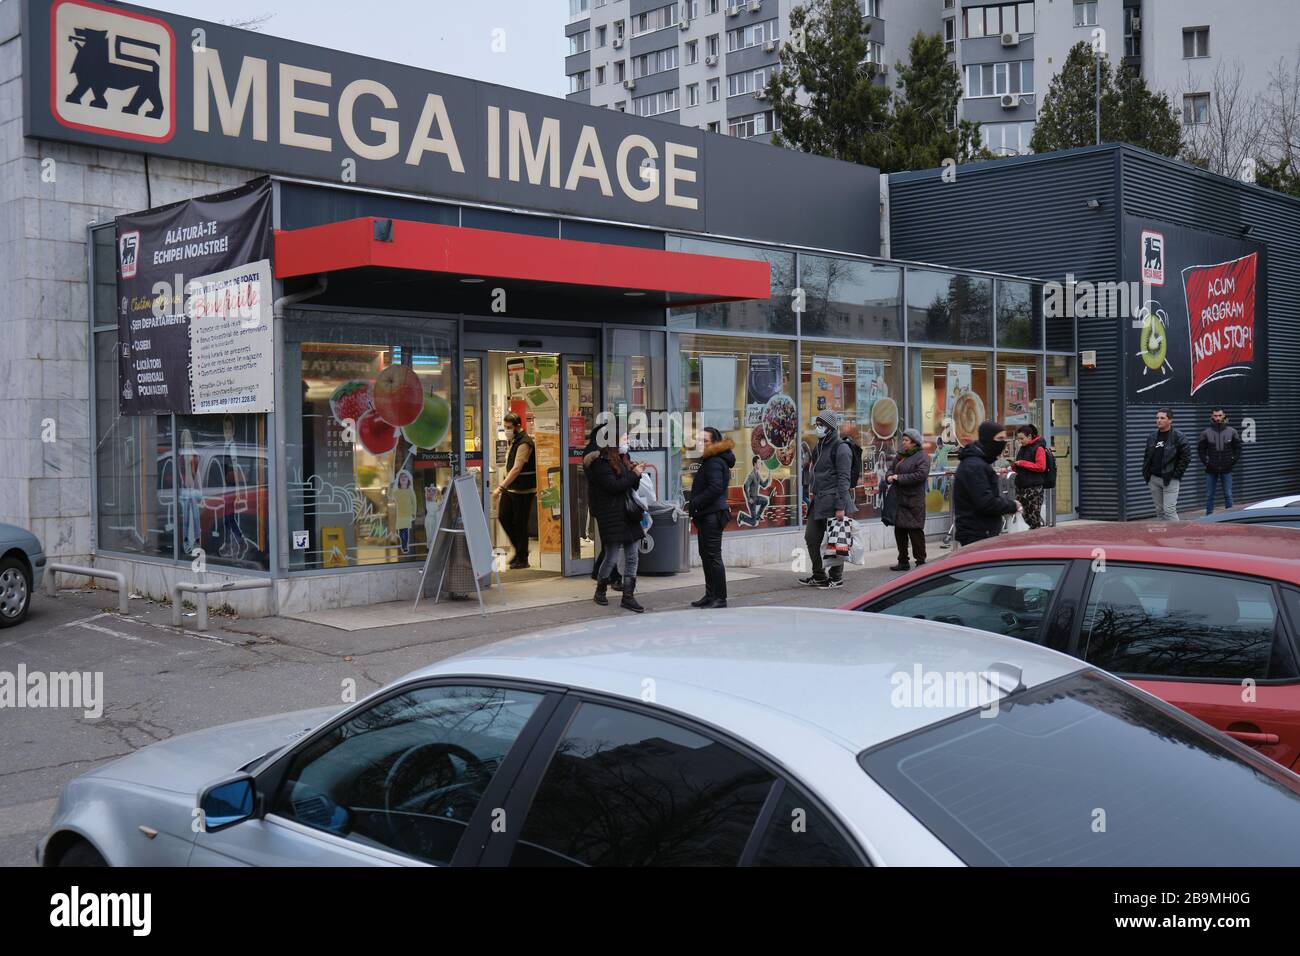 Bucharest, Romania - March 24, 2020: People wait in line in front of a Mega Image supermarket, keeping a safe distance between them, after more strict Stock Photo